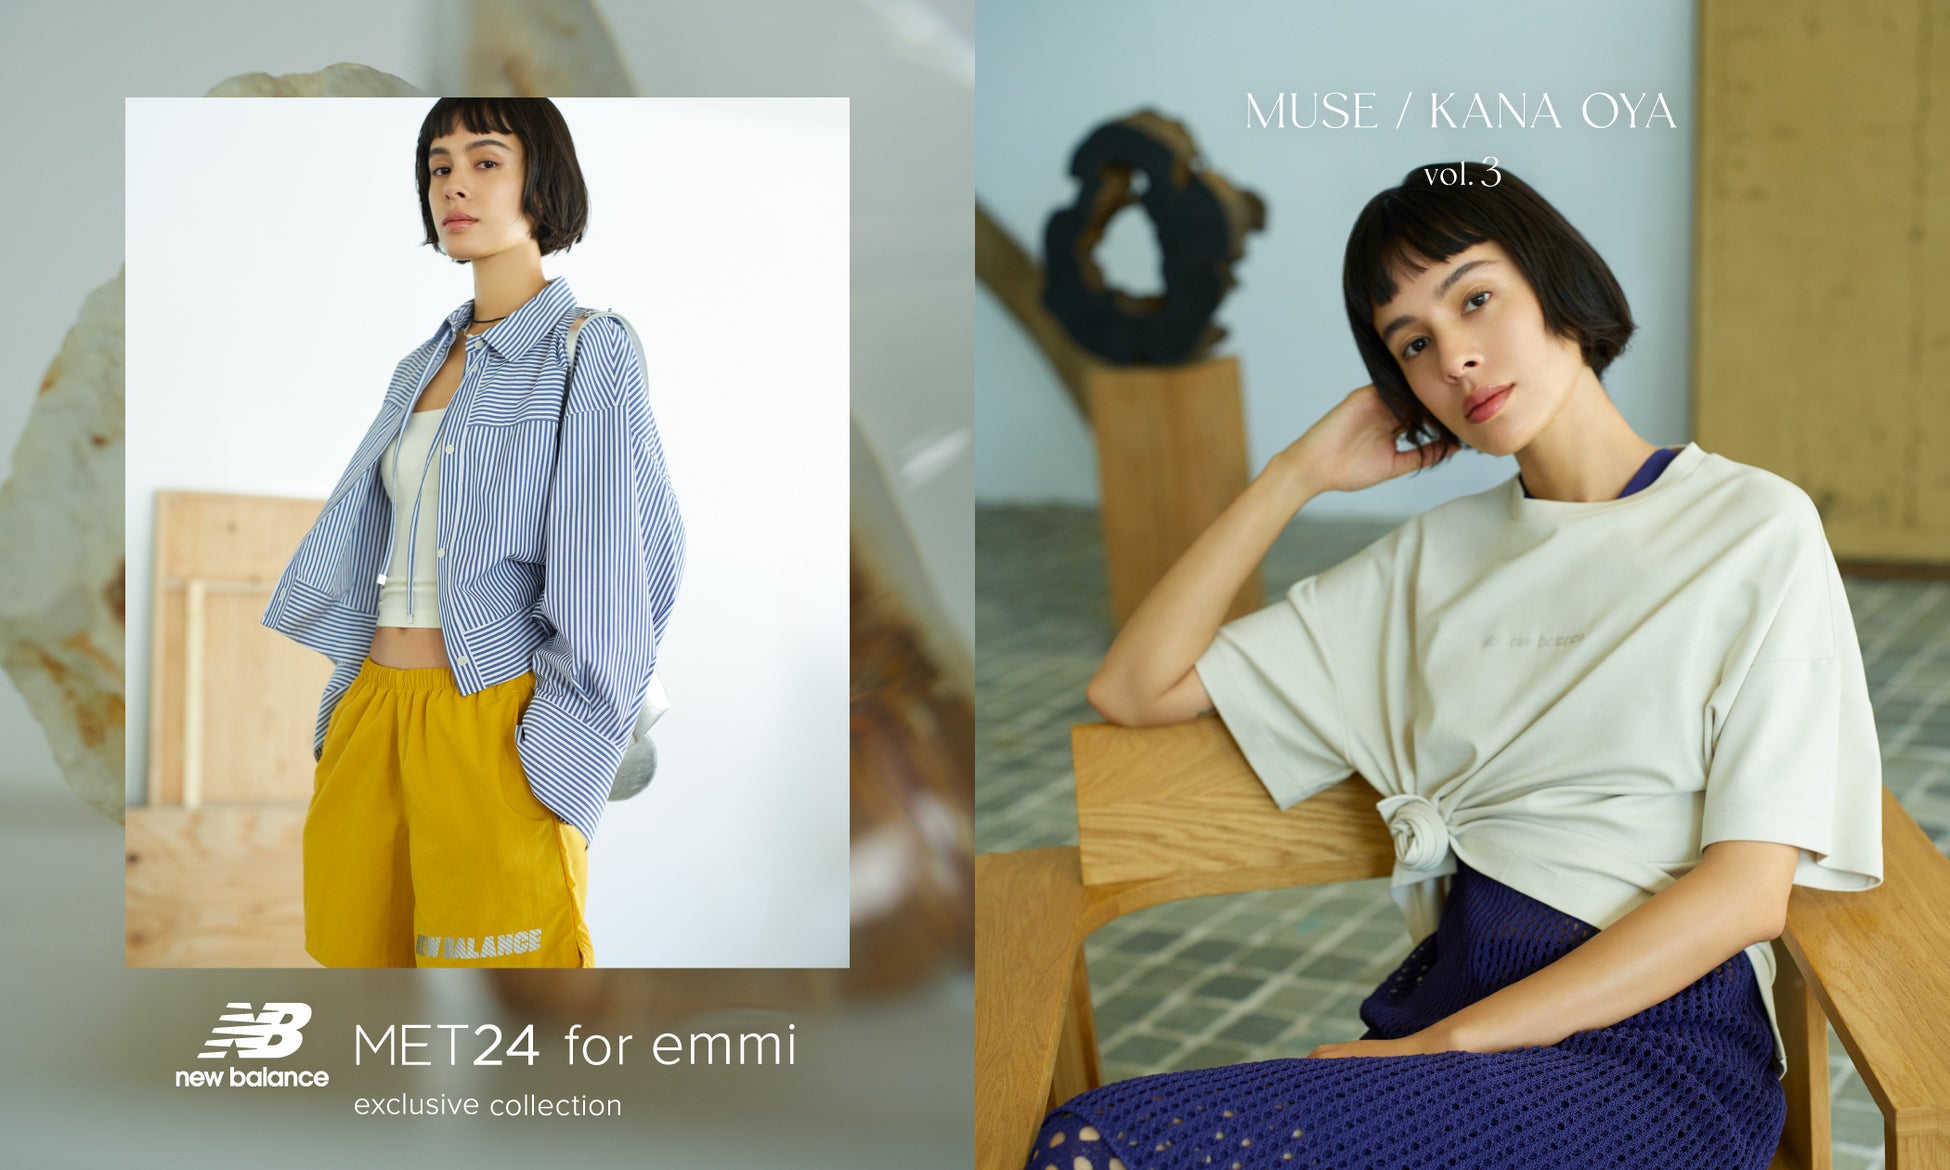 「New Balance for emmi」プロジェクトMET24 for emmi exclusive collection　アパレル別注2型発売